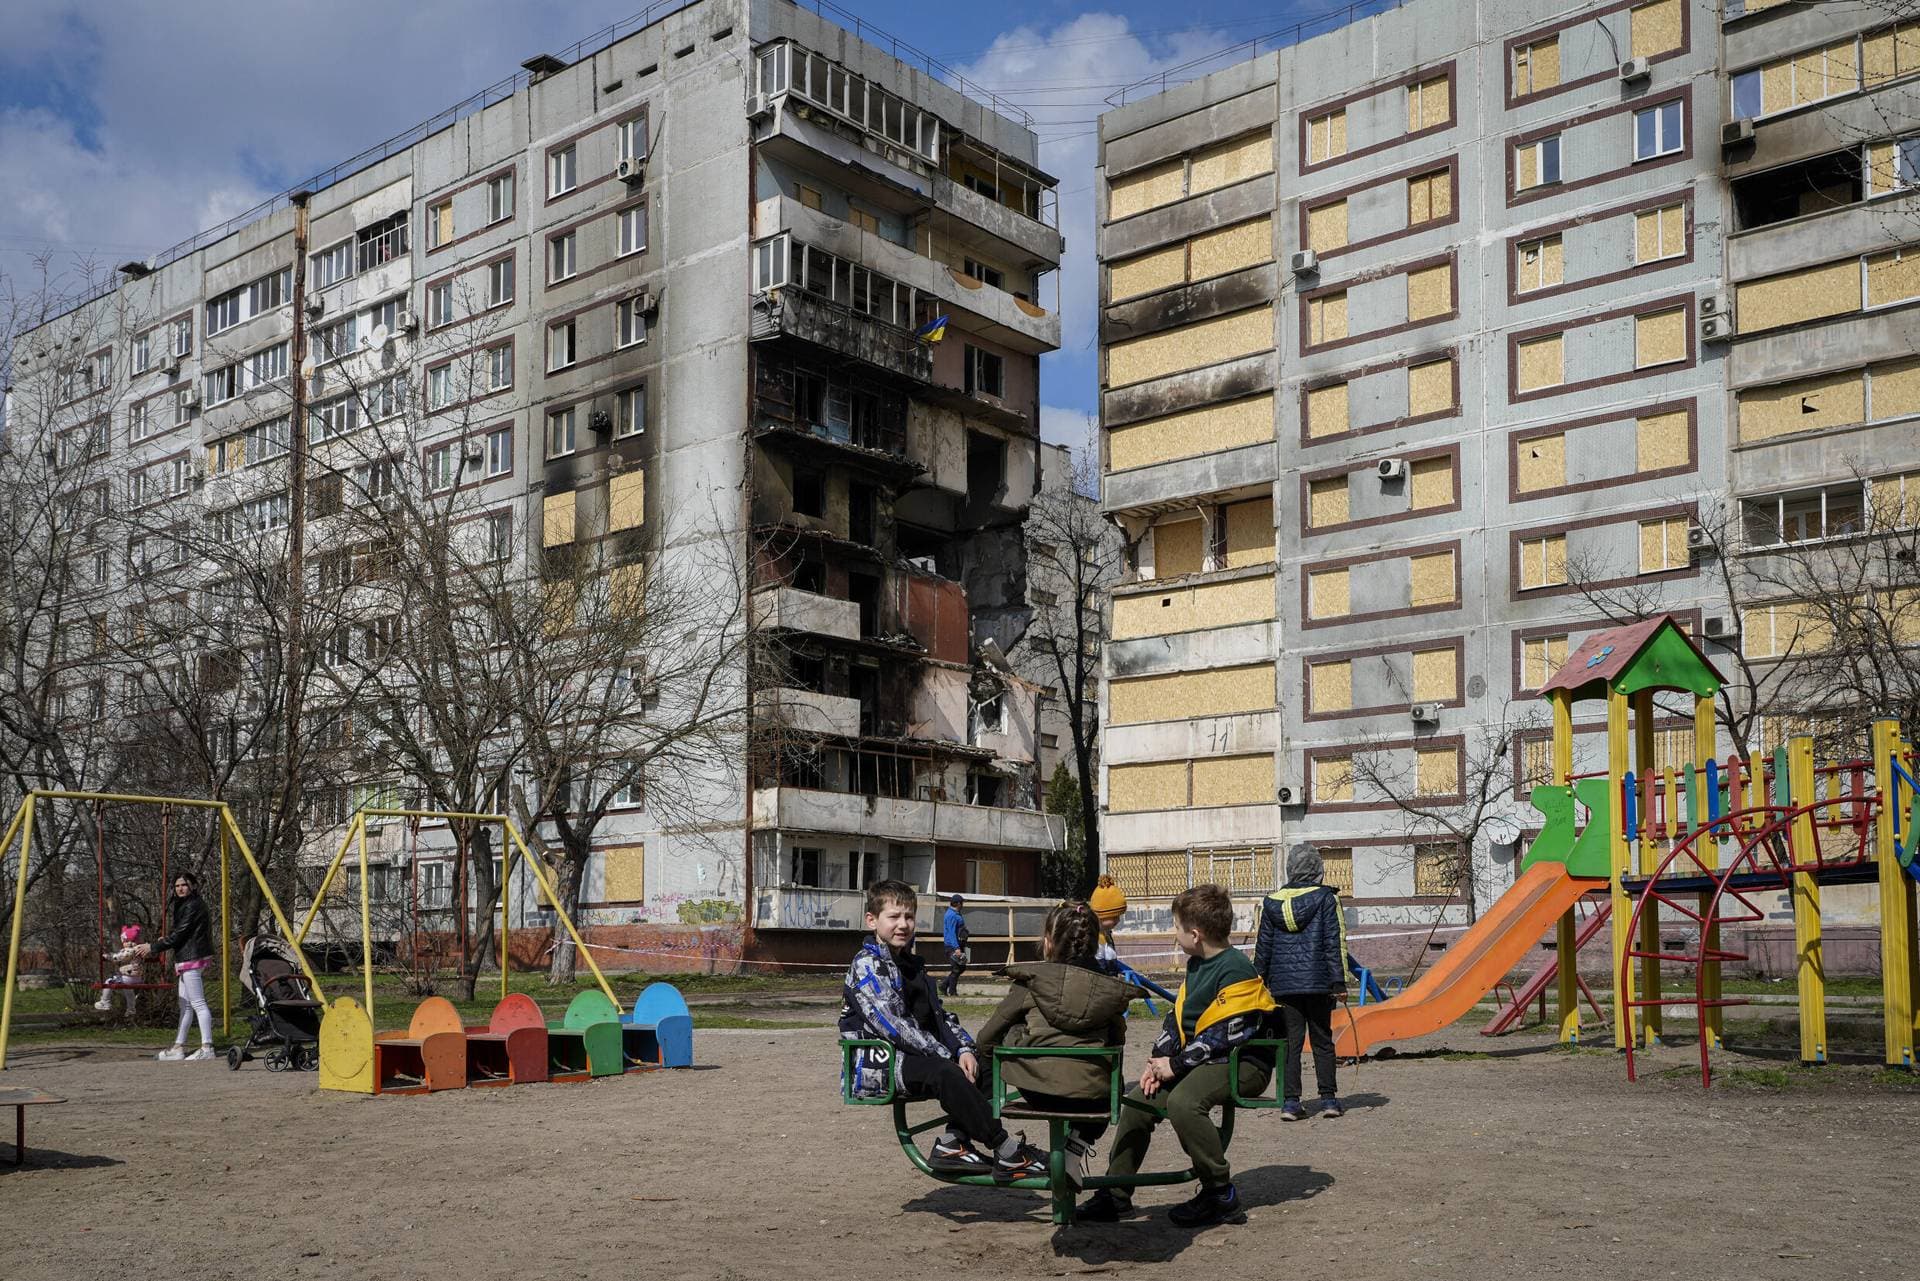 Children play in a playground in front of missile-damaged buildings in Zaporizhzhia